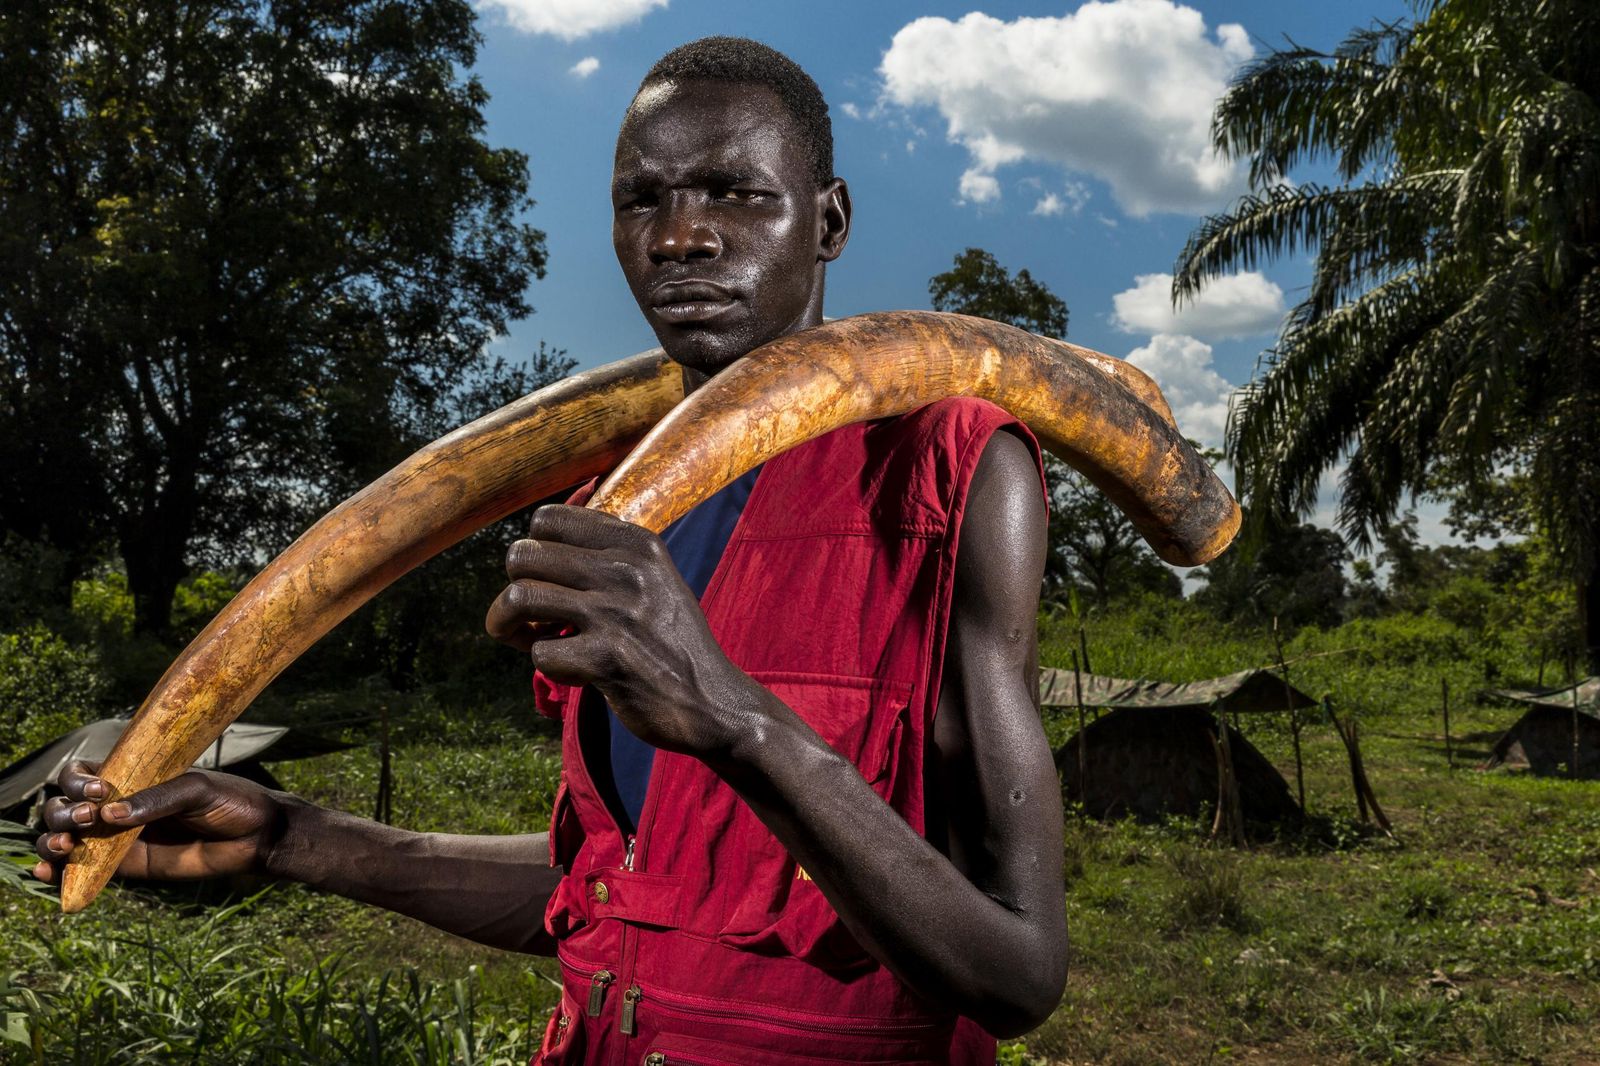 © Brent Stirton, from the series Ivory Wars